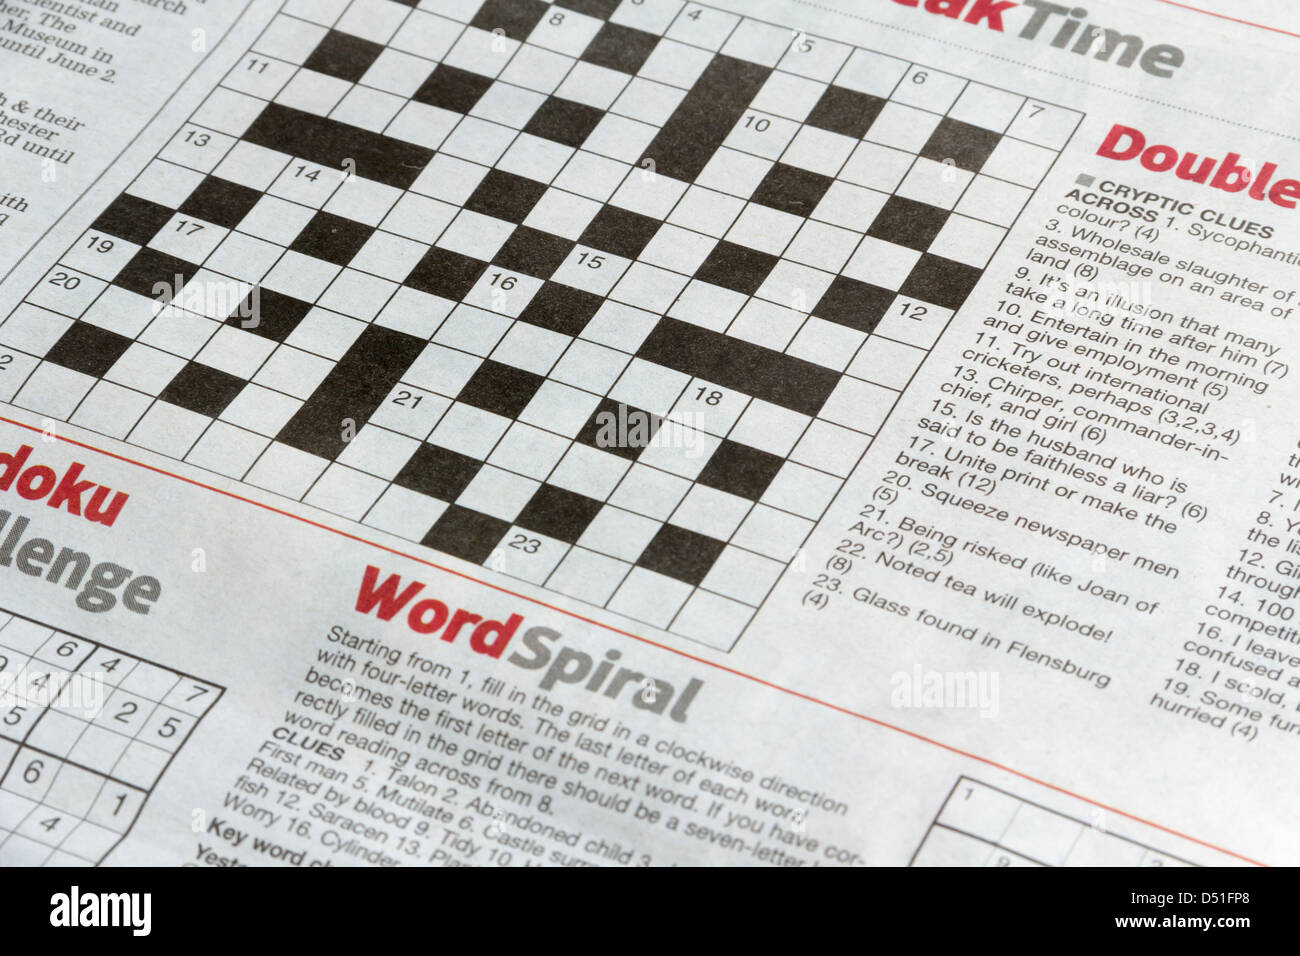 Crossword and puzzle page of the Bolton News, a local daily newspaper, published six days per week. Stock Photo